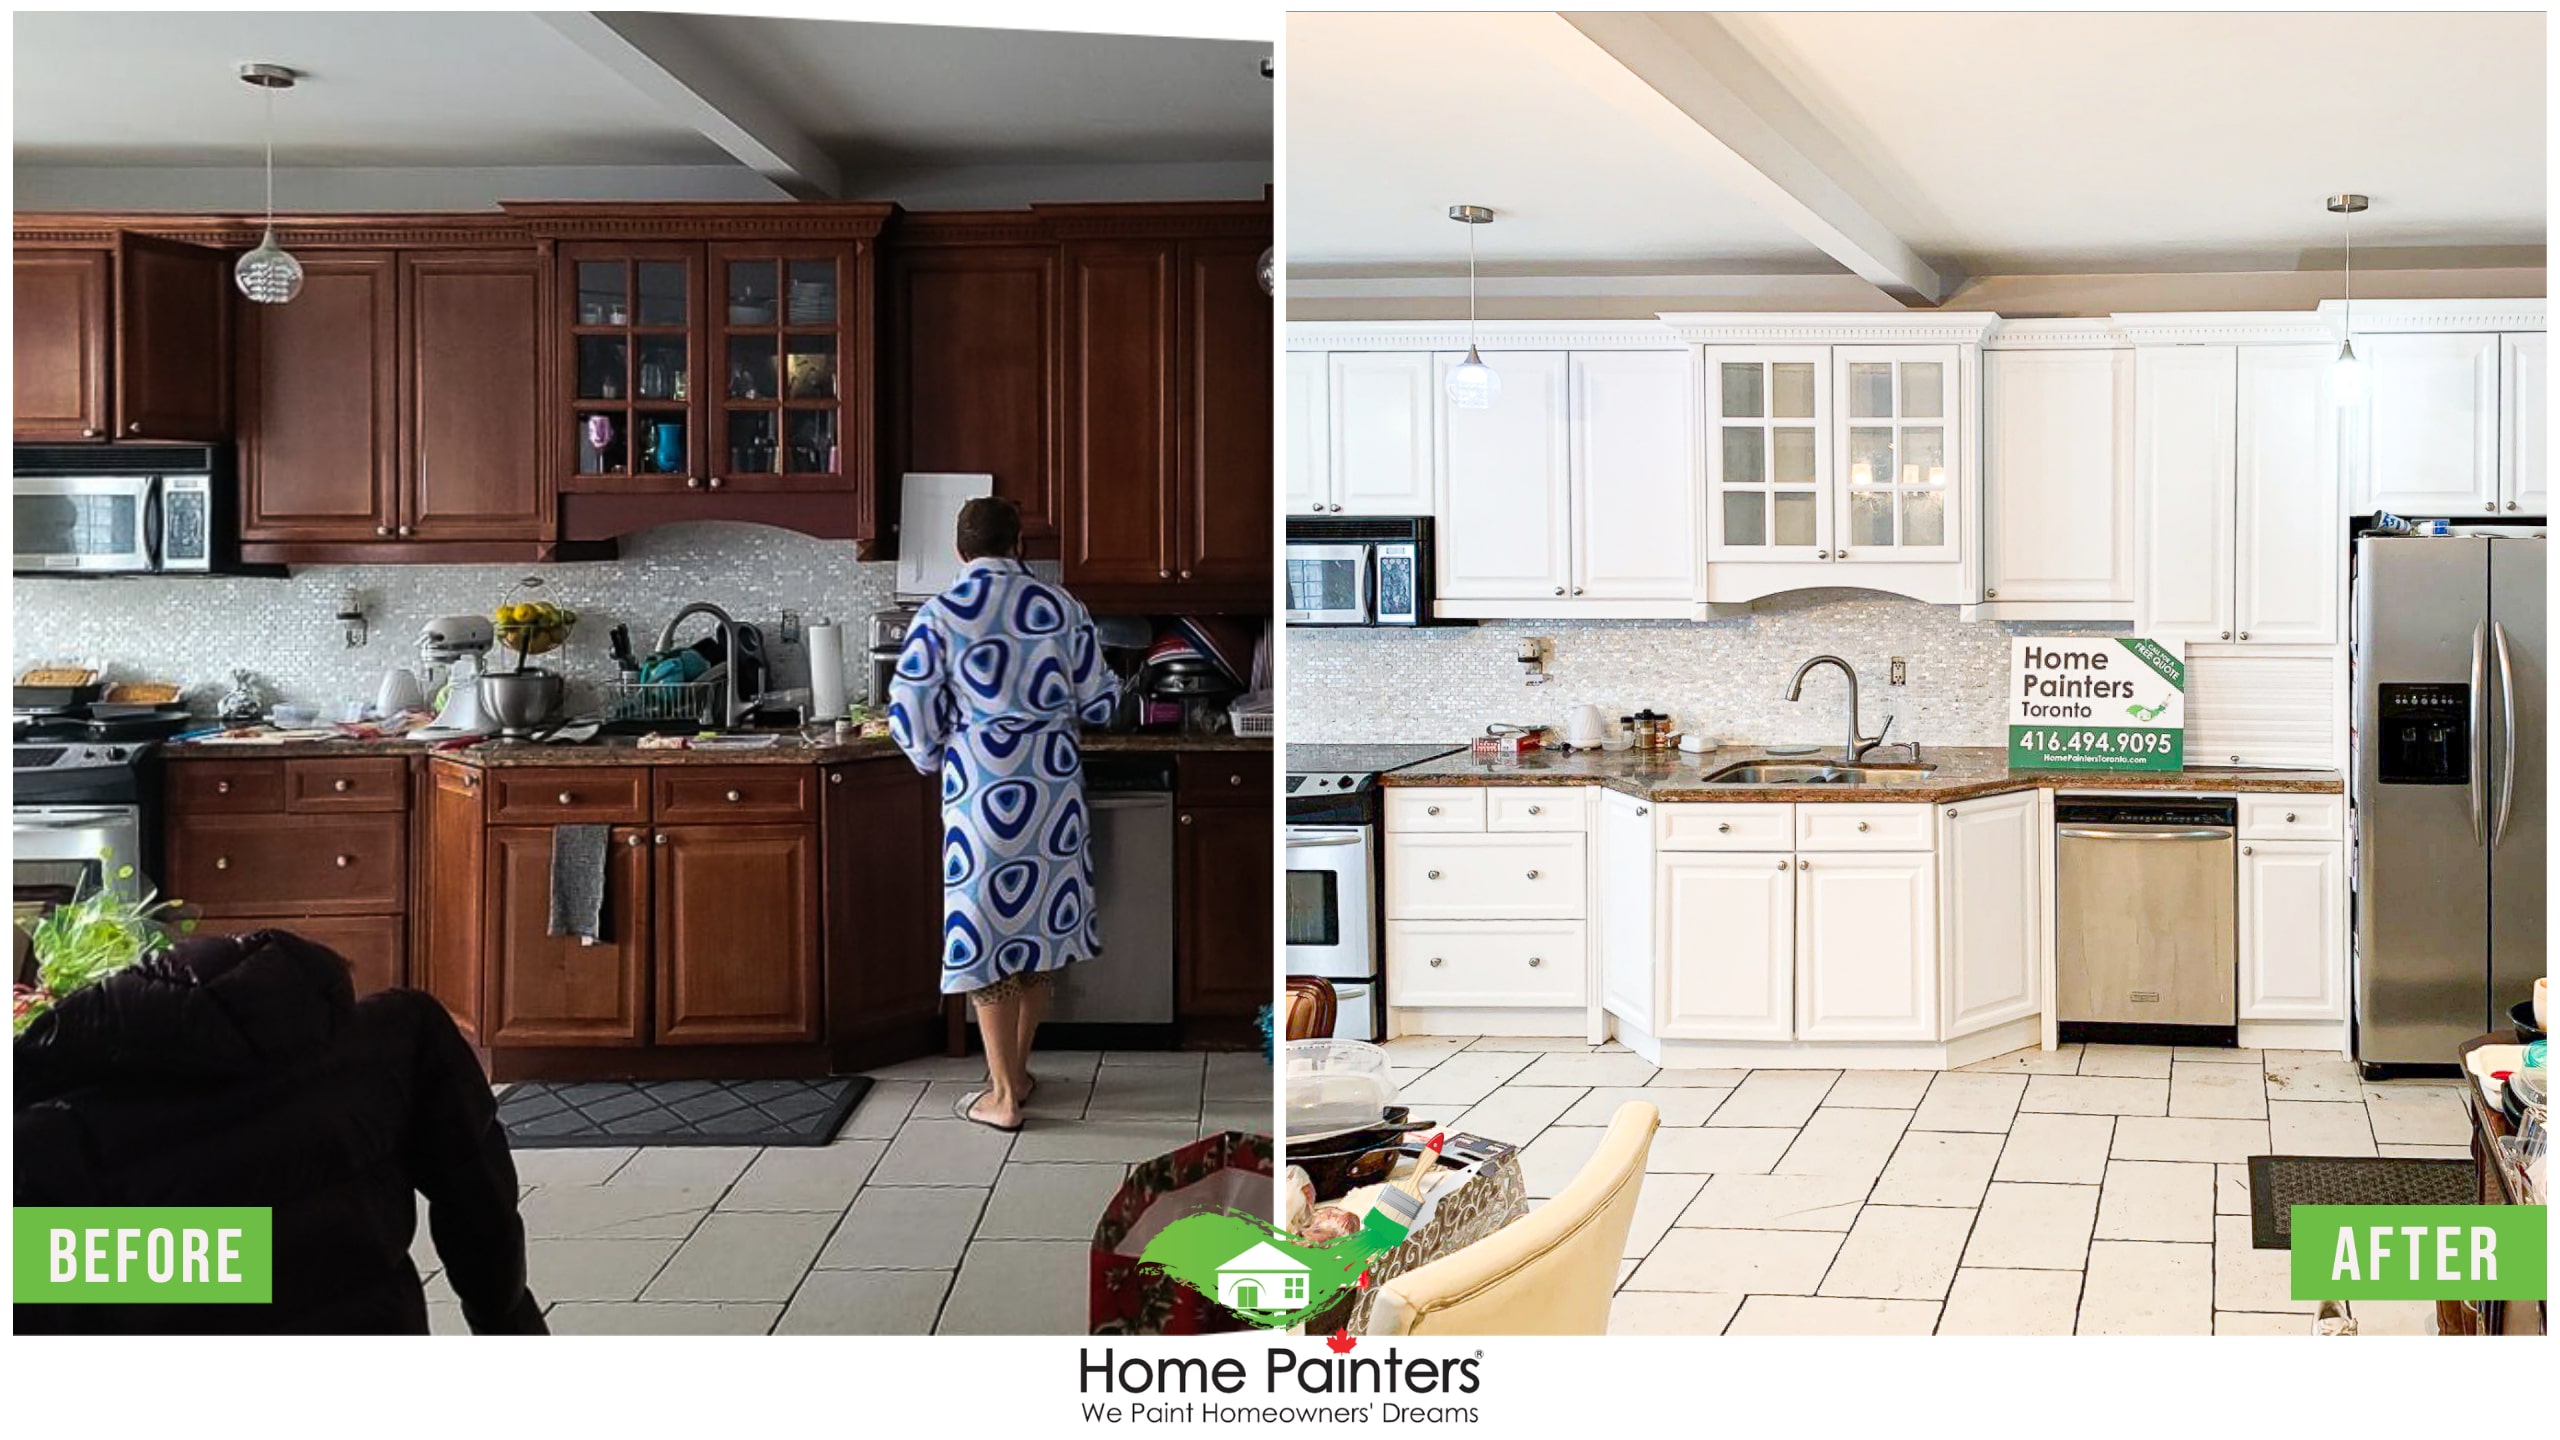 interior_kitchen_cabinet_painting_-Clarke-Pam_before-and-after_-2